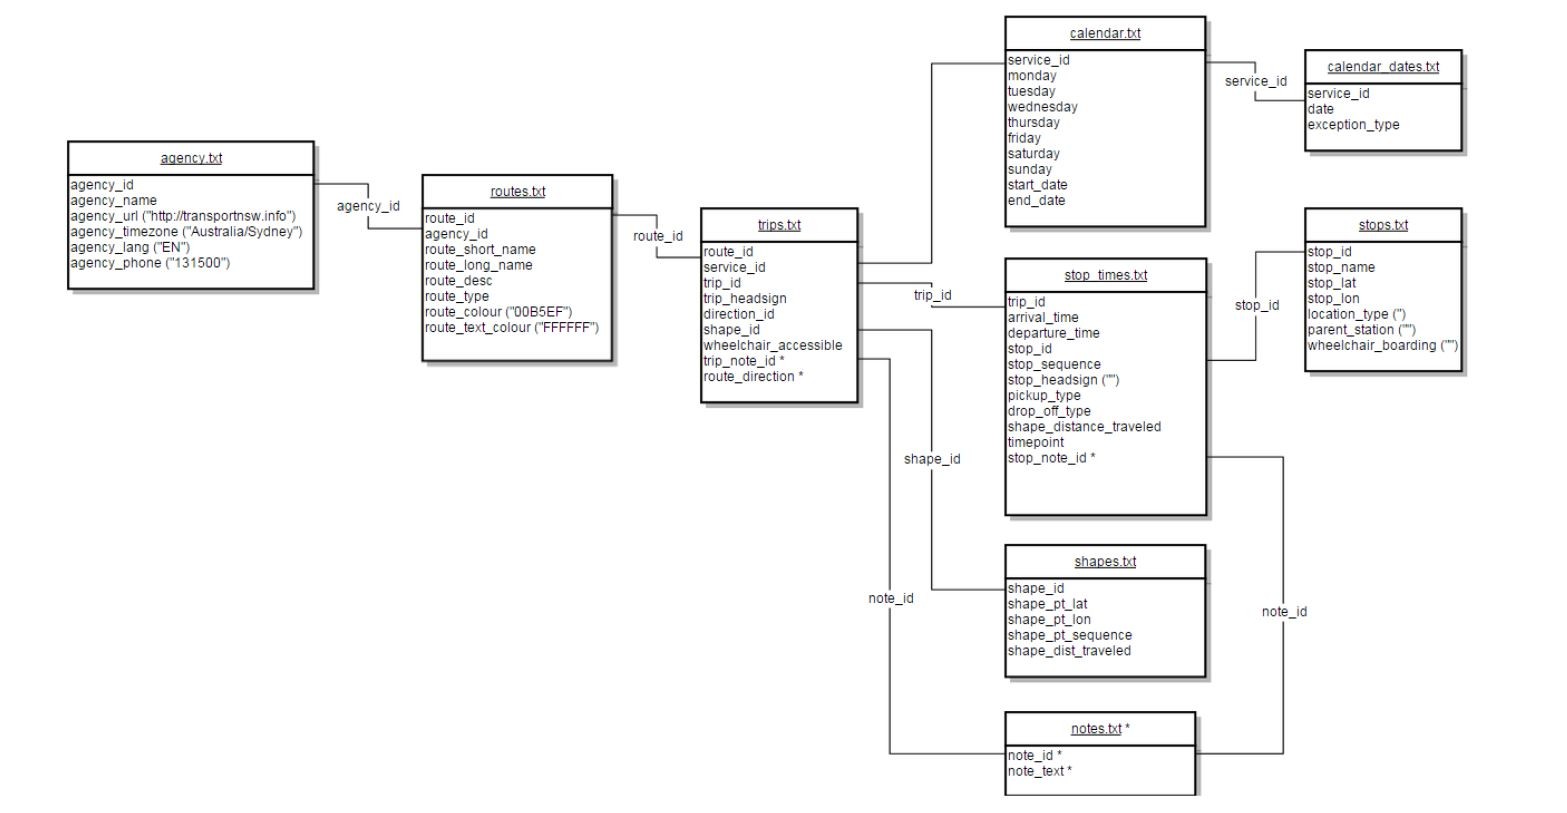 Image of the relationship diagram for files in the GTFS buses bundle